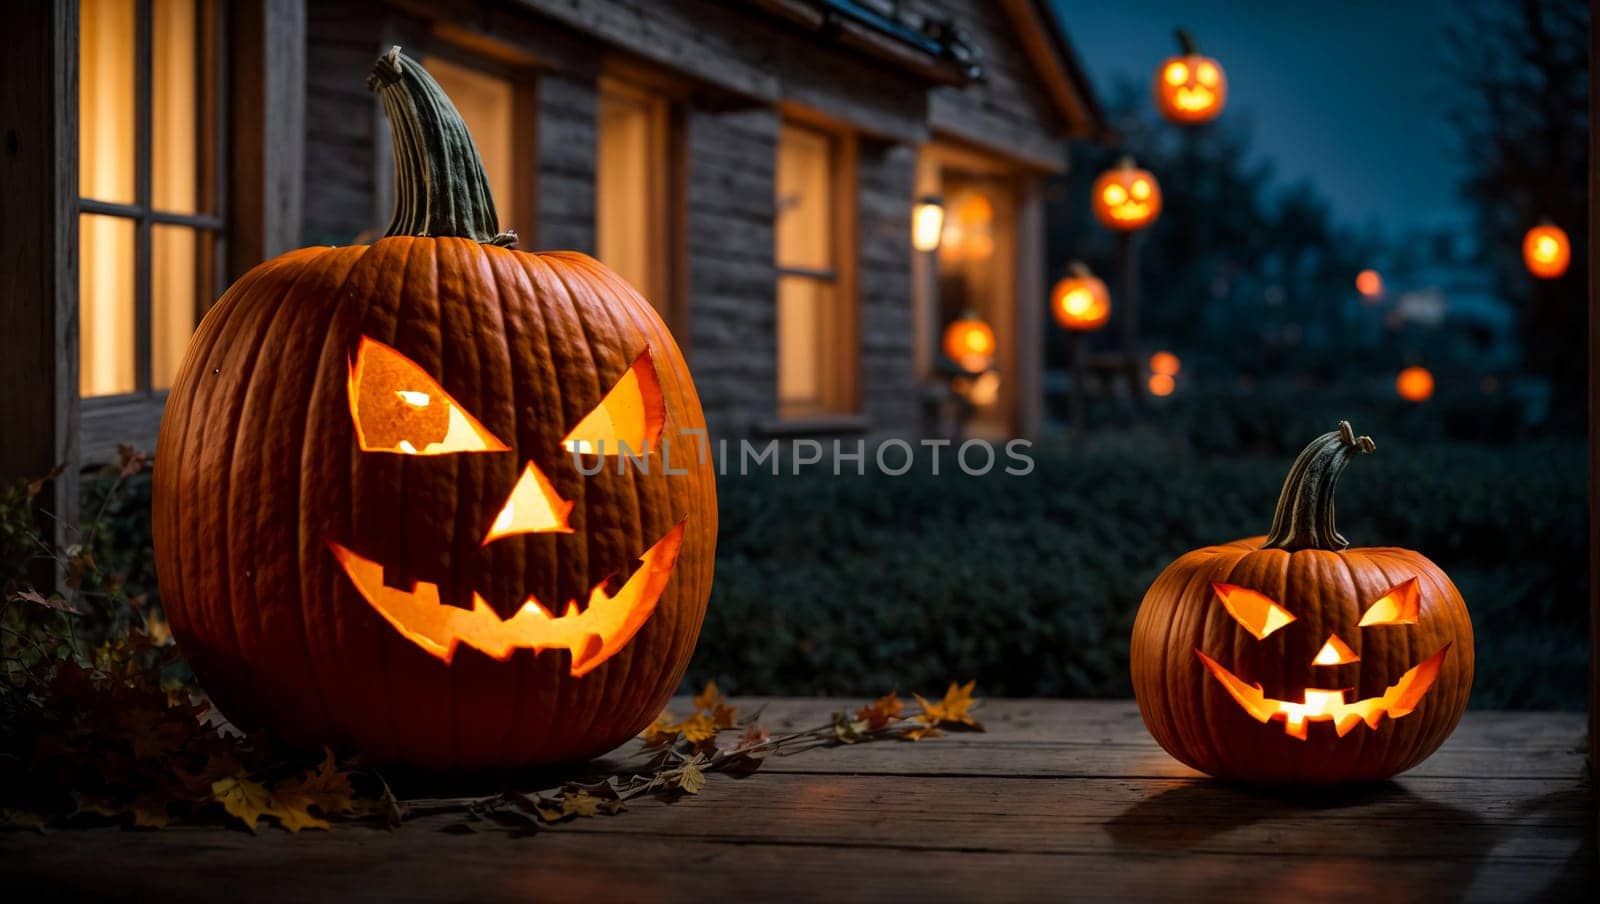 A pumpkin carved in the shape of a lantern on Halloween Day, with a terrifying and sinister face